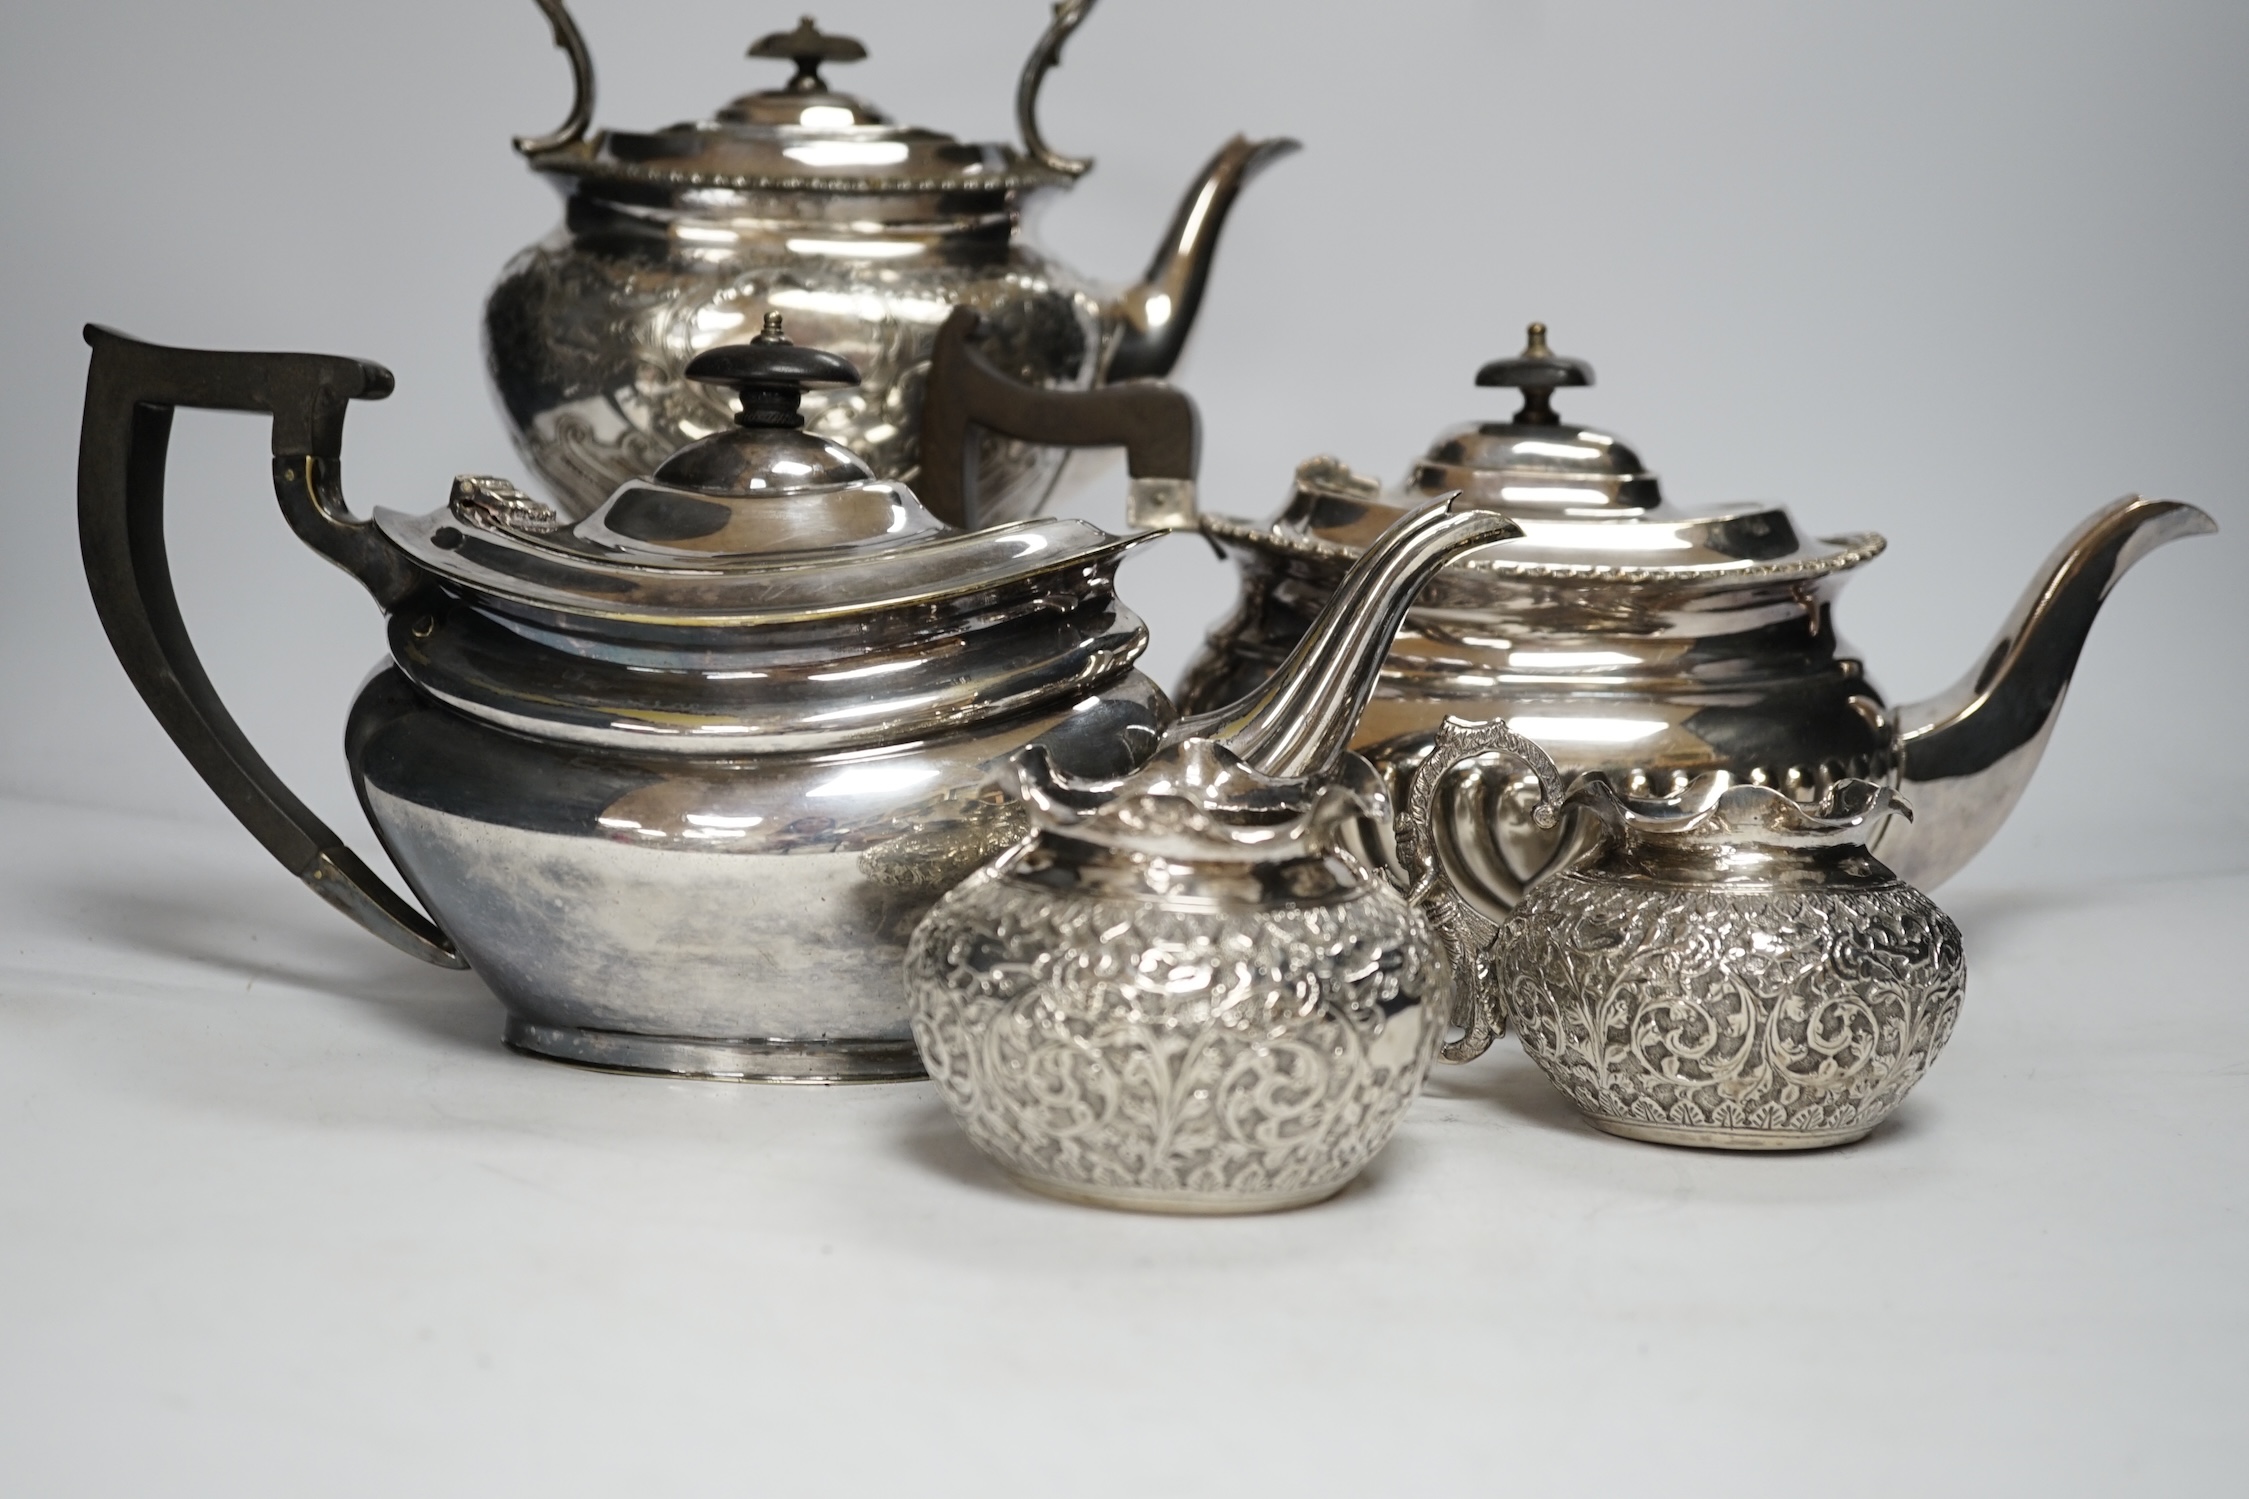 A plated kettle on stand, two plated teapots, a sugar bowl and a cream jug